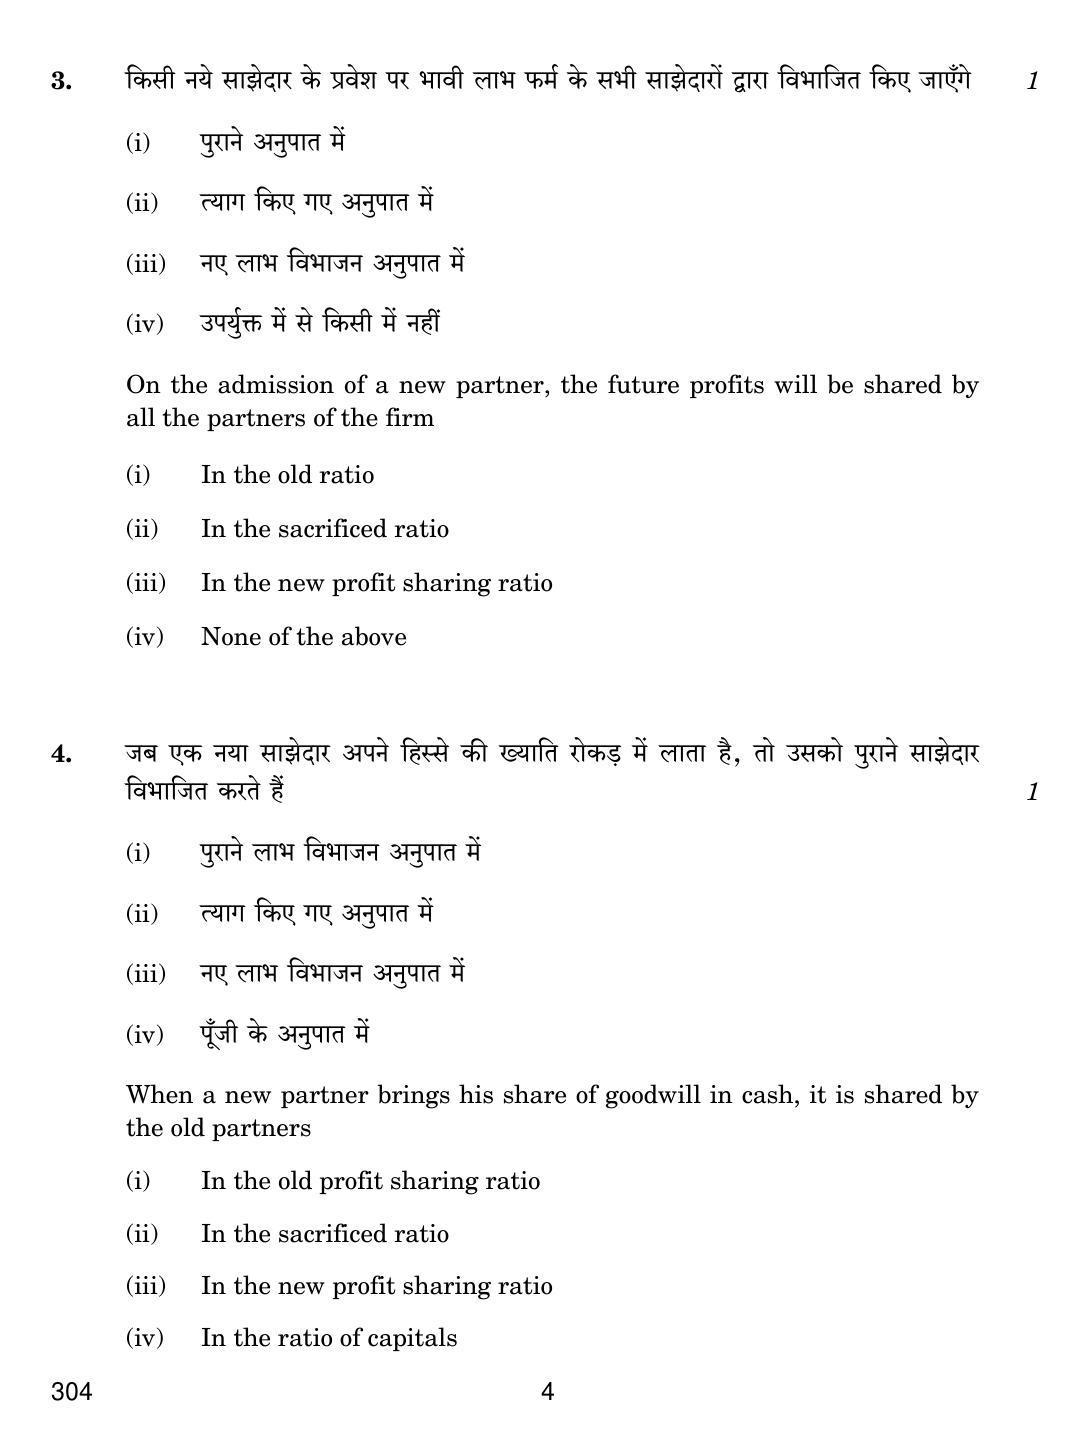 CBSE Class 12 304 FINANCIAL ACCOUNTING 2018 Question Paper - Page 4